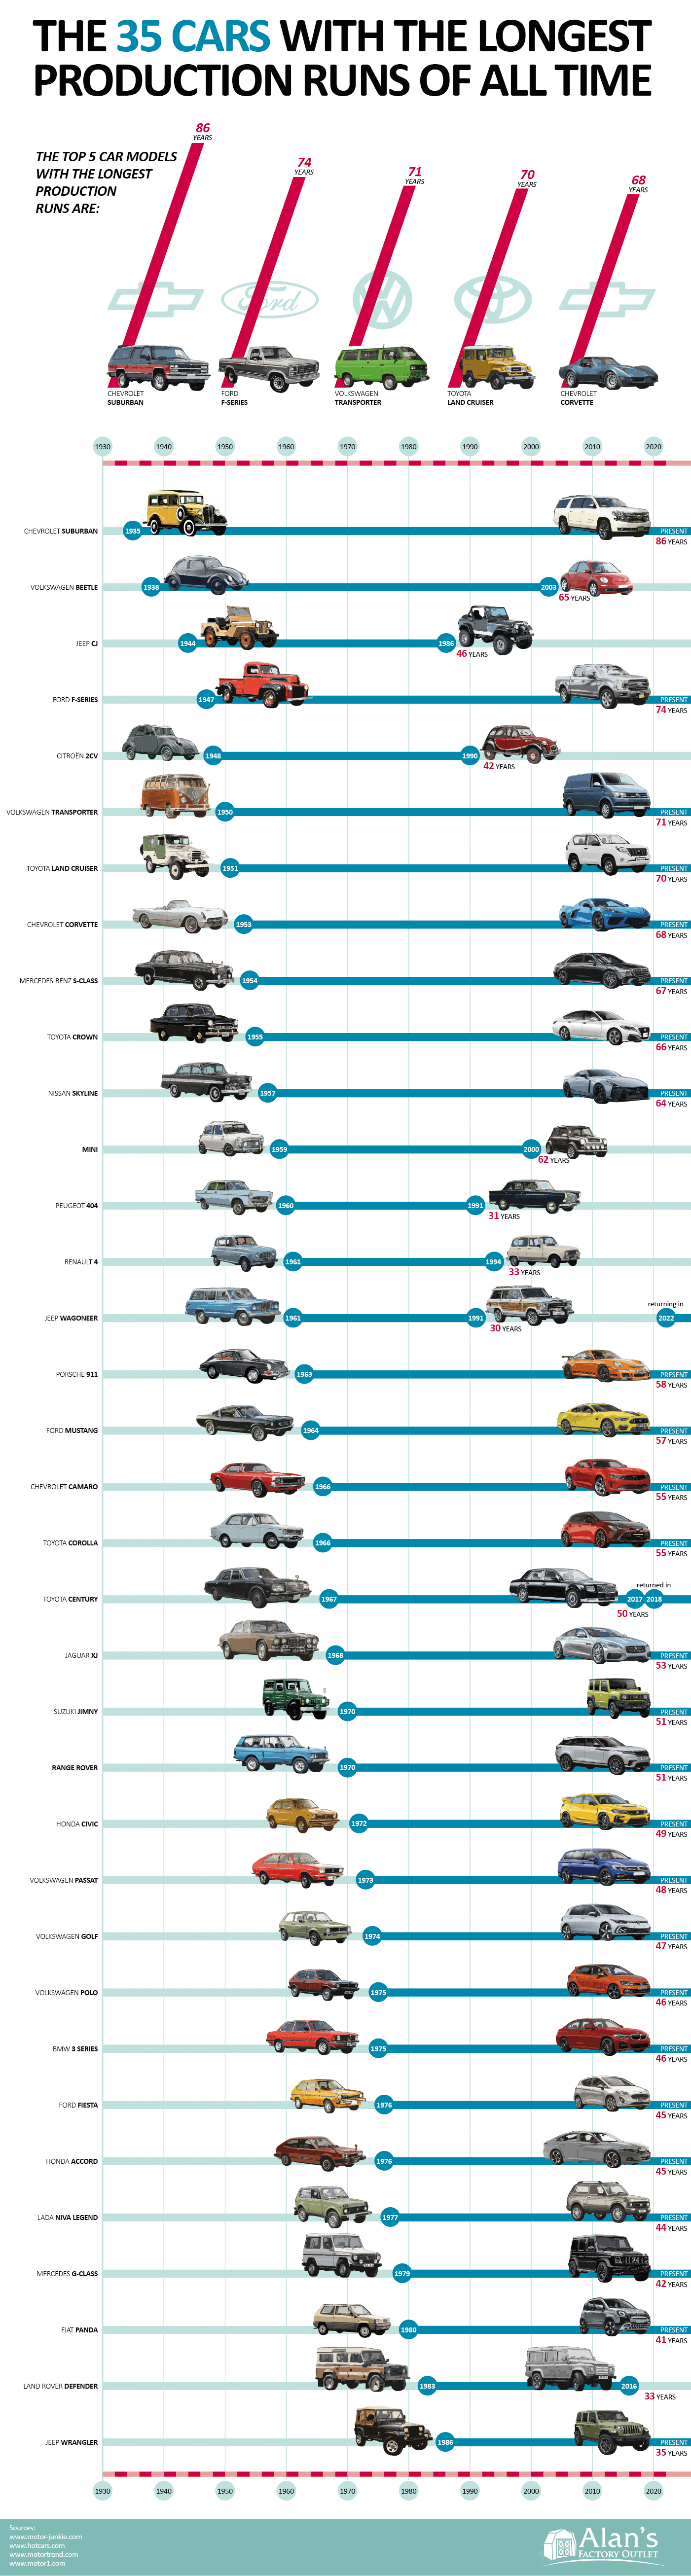 The 35 Cars With the Longest Production Runs of All Time